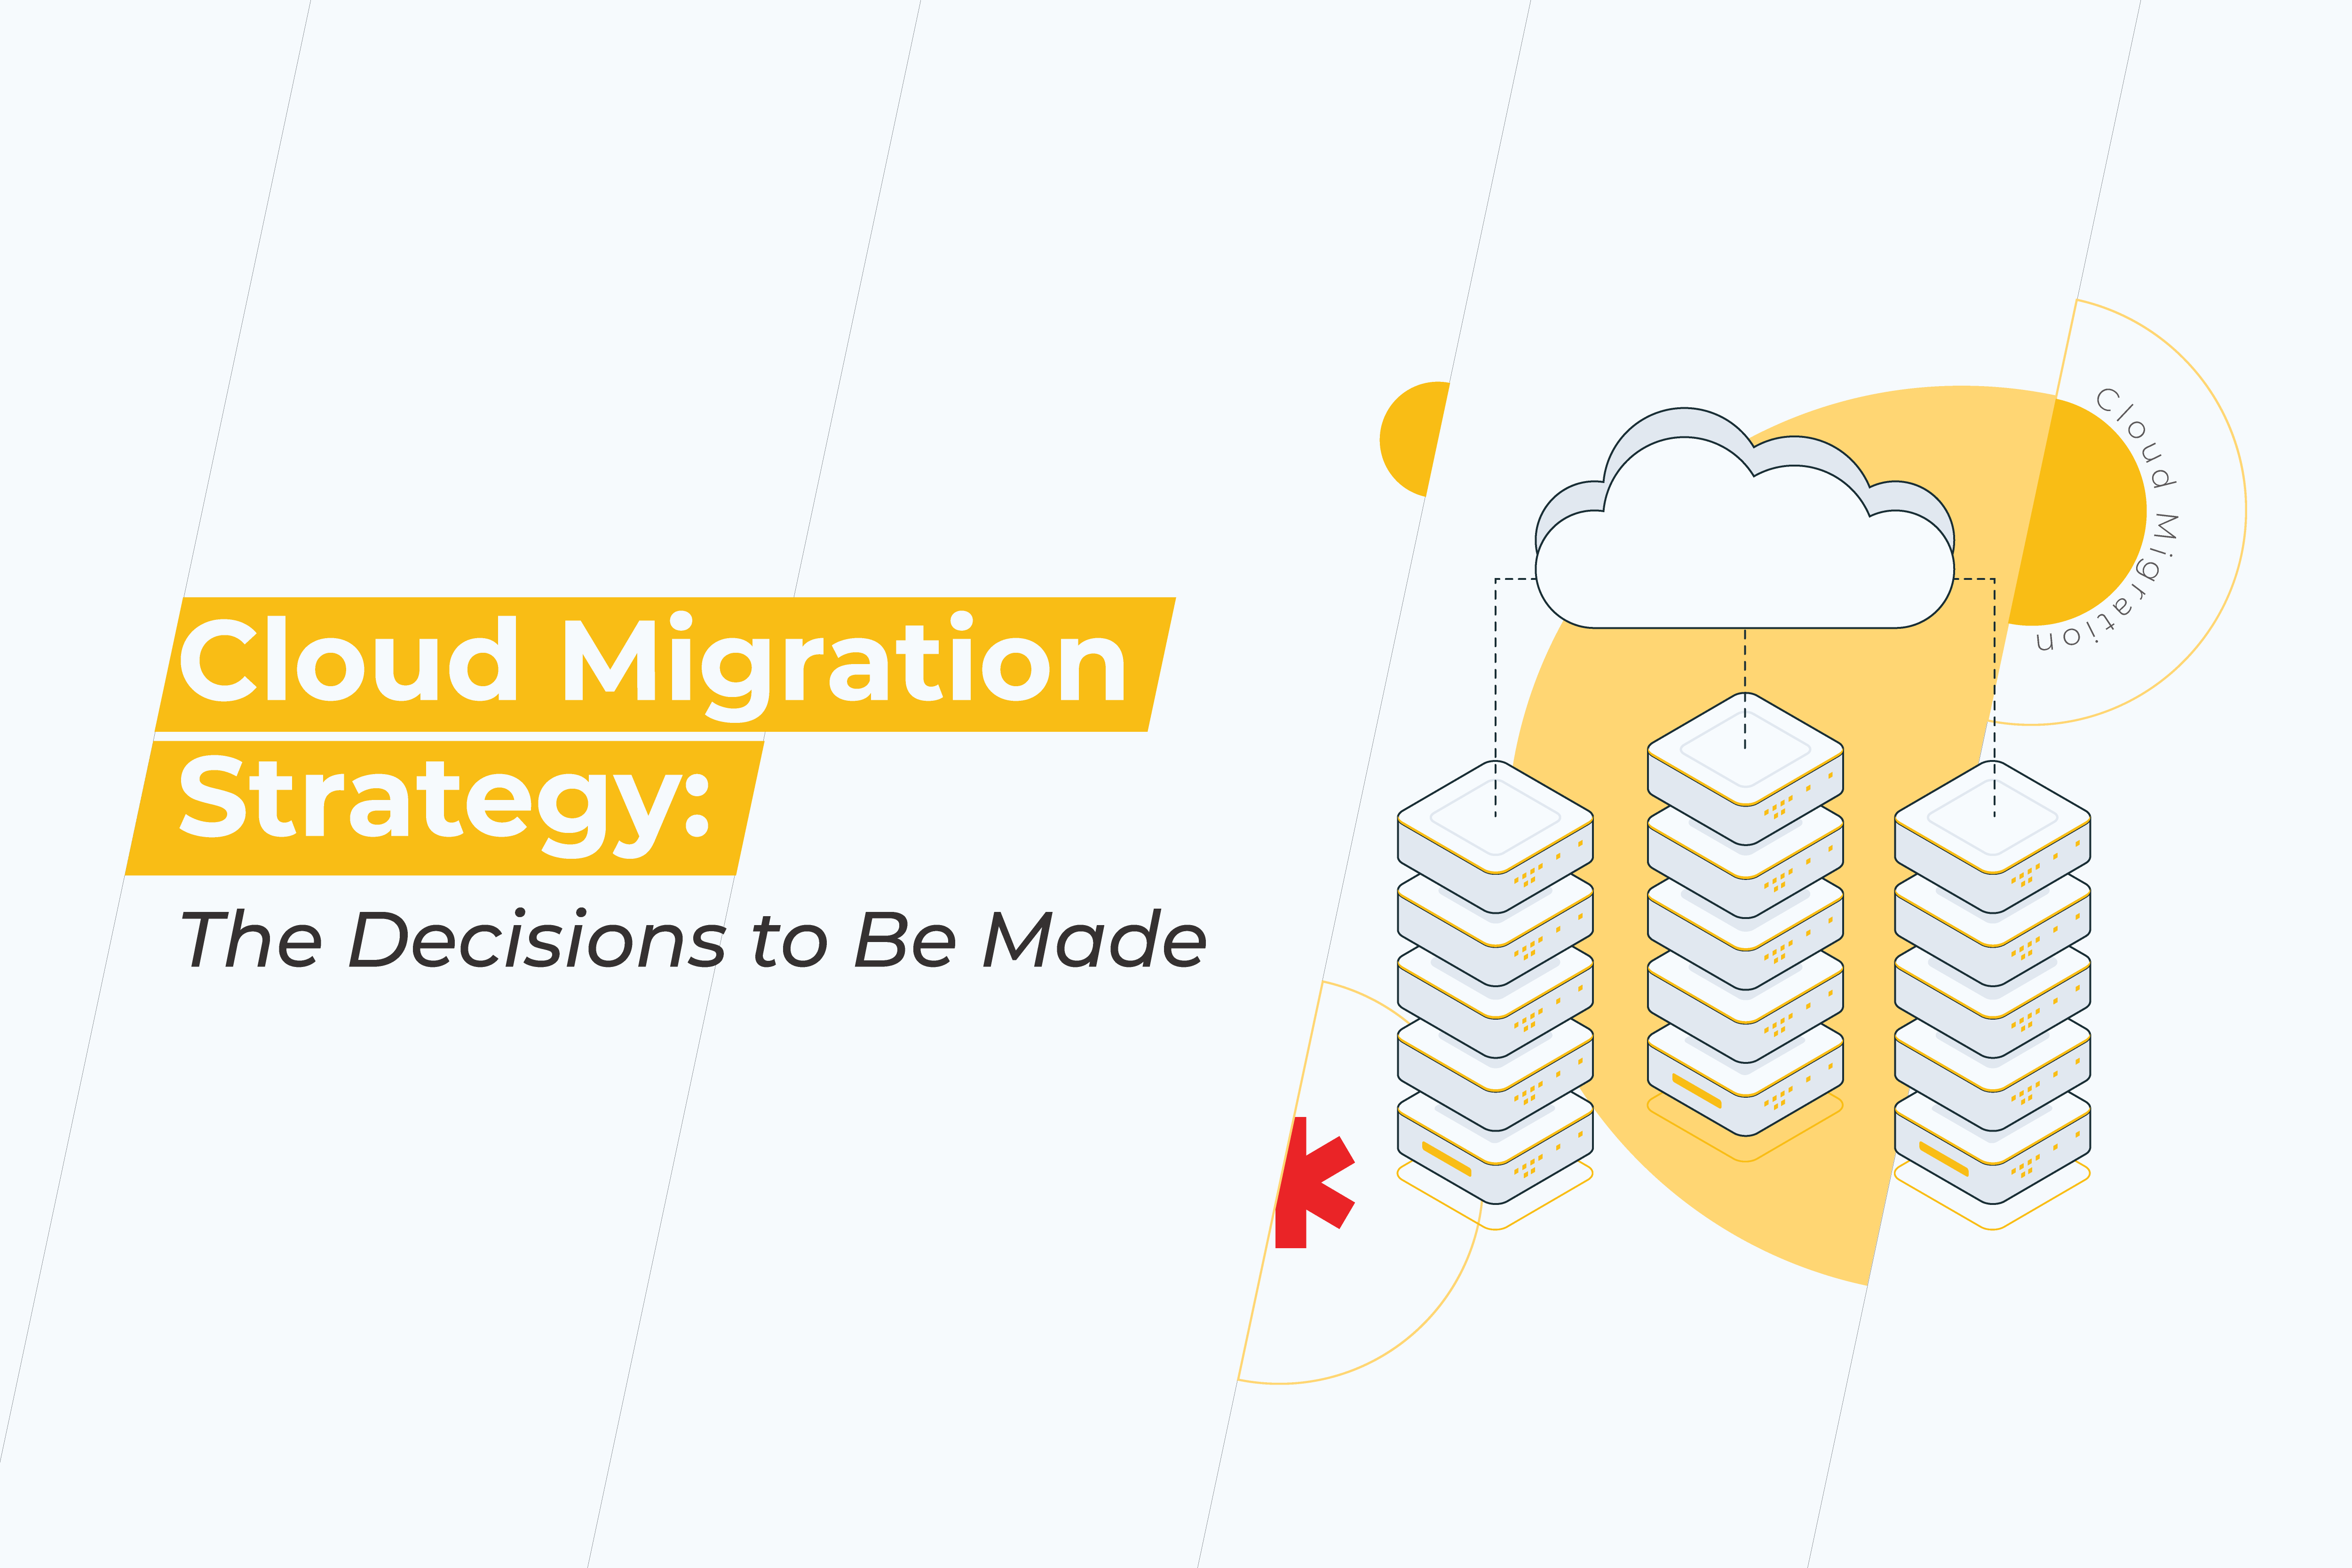 Cloud Migration Strategy: The Decisions to Be Made